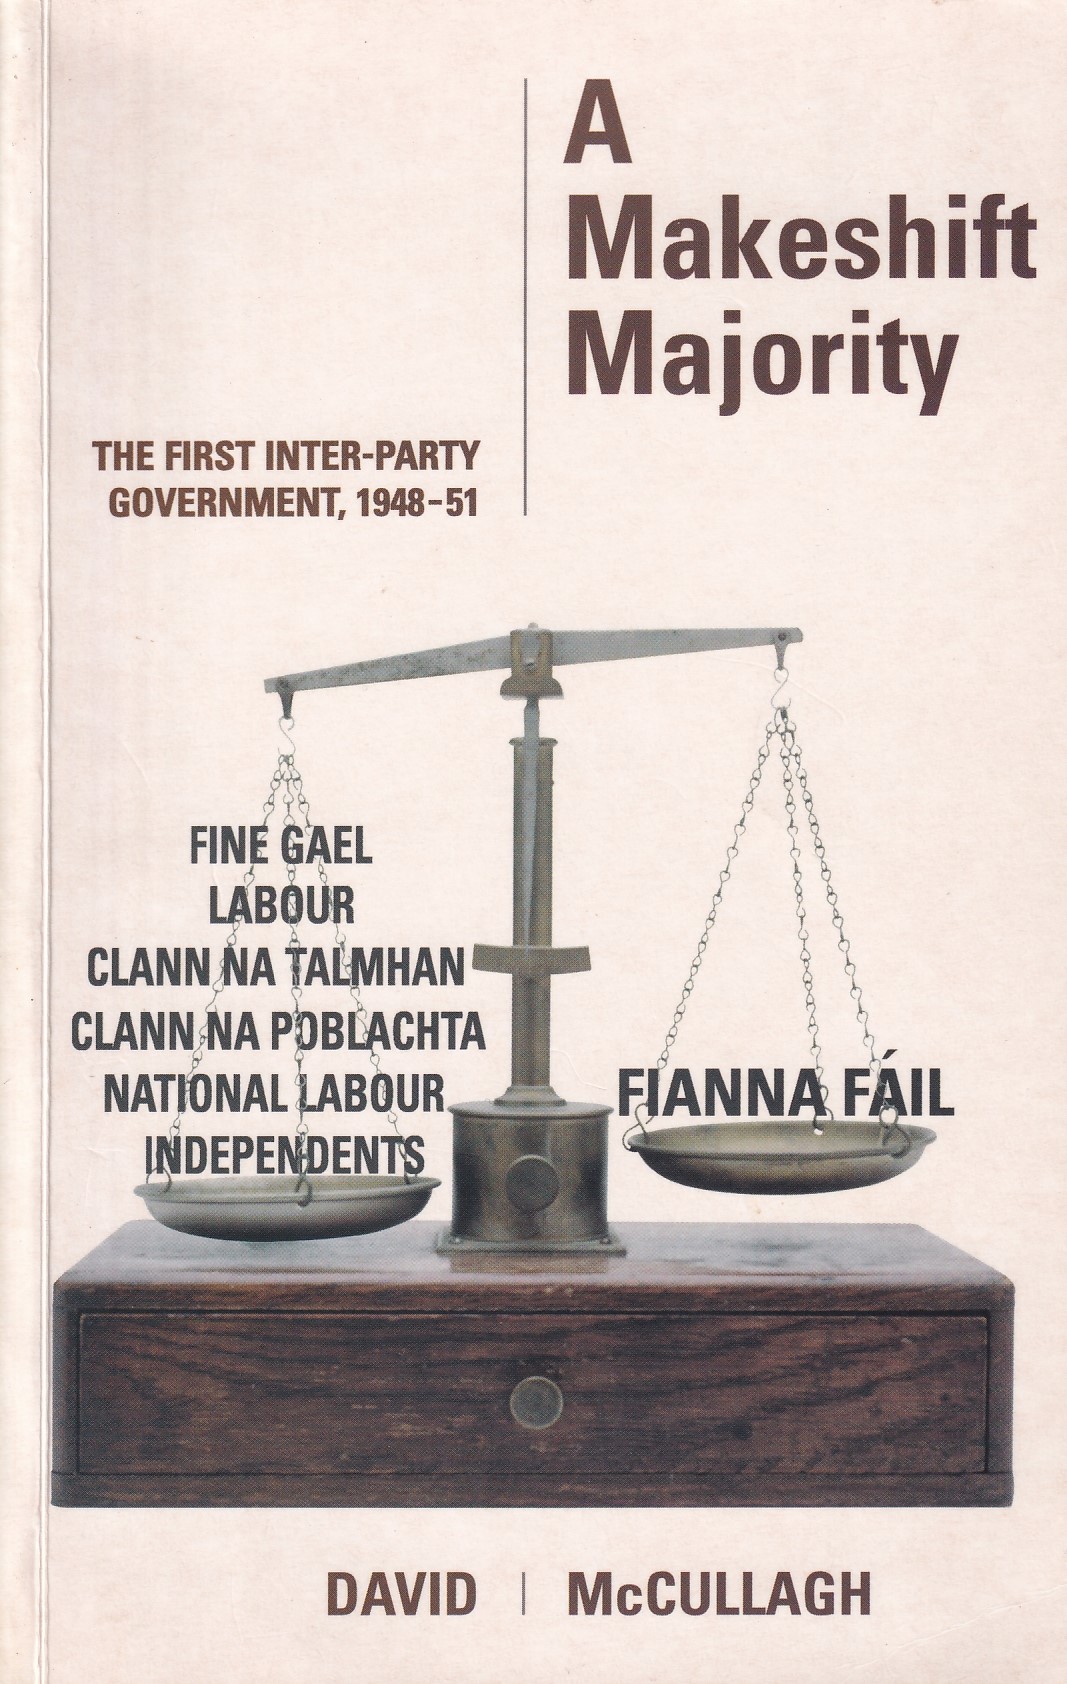 A Makeshift Majority: The First Inter-Party Government, 1948-51 by David McCullagh